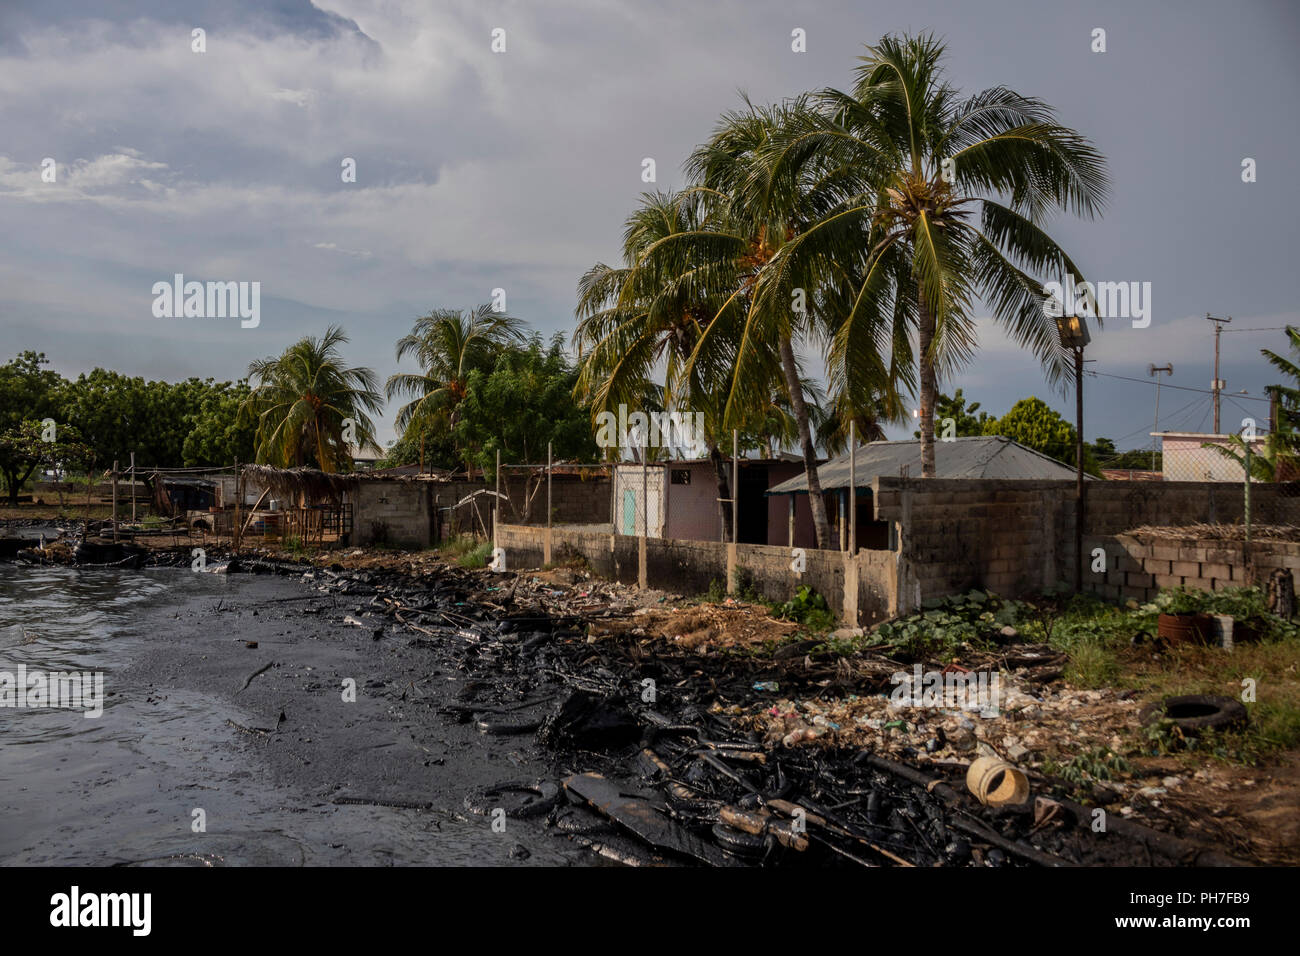 17 August 2018, Venezuela, Maracaibo: Shore of Lake Maracaibo polluted by oil and garbage. Underneath the lake are large deposits from which the state-owned Venezuelan company PDVSA produces oil and gas. Oil pipelines are already leaking there. However, the pollution of the lake seems to have become chronic. There are hardly any official figures on this, given the situation, which is strictly controlled by the national regime. Venezuela - once the richest country in South America and blessed with the world's largest oil reserves - has been increasingly plundering since the beginning of the yea Stock Photo